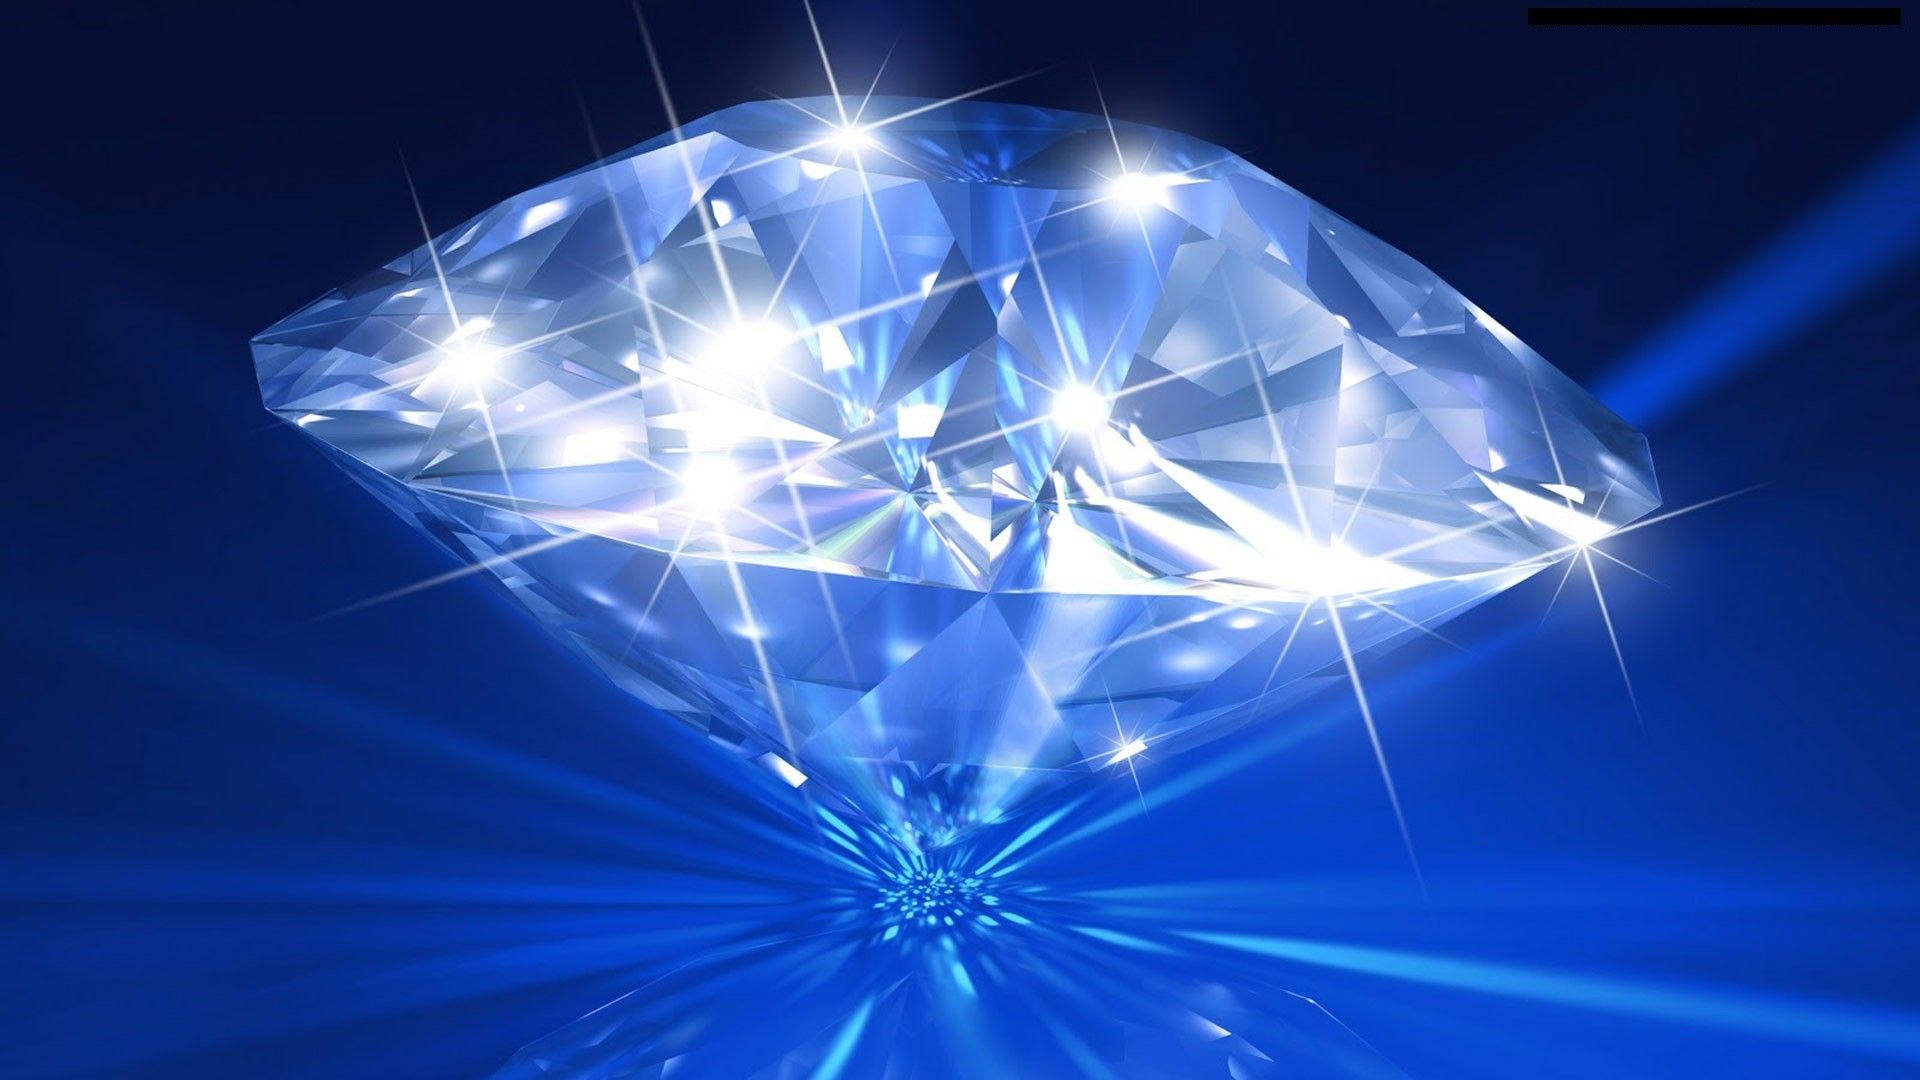 A diamond with blue rays coming out of it - Diamond